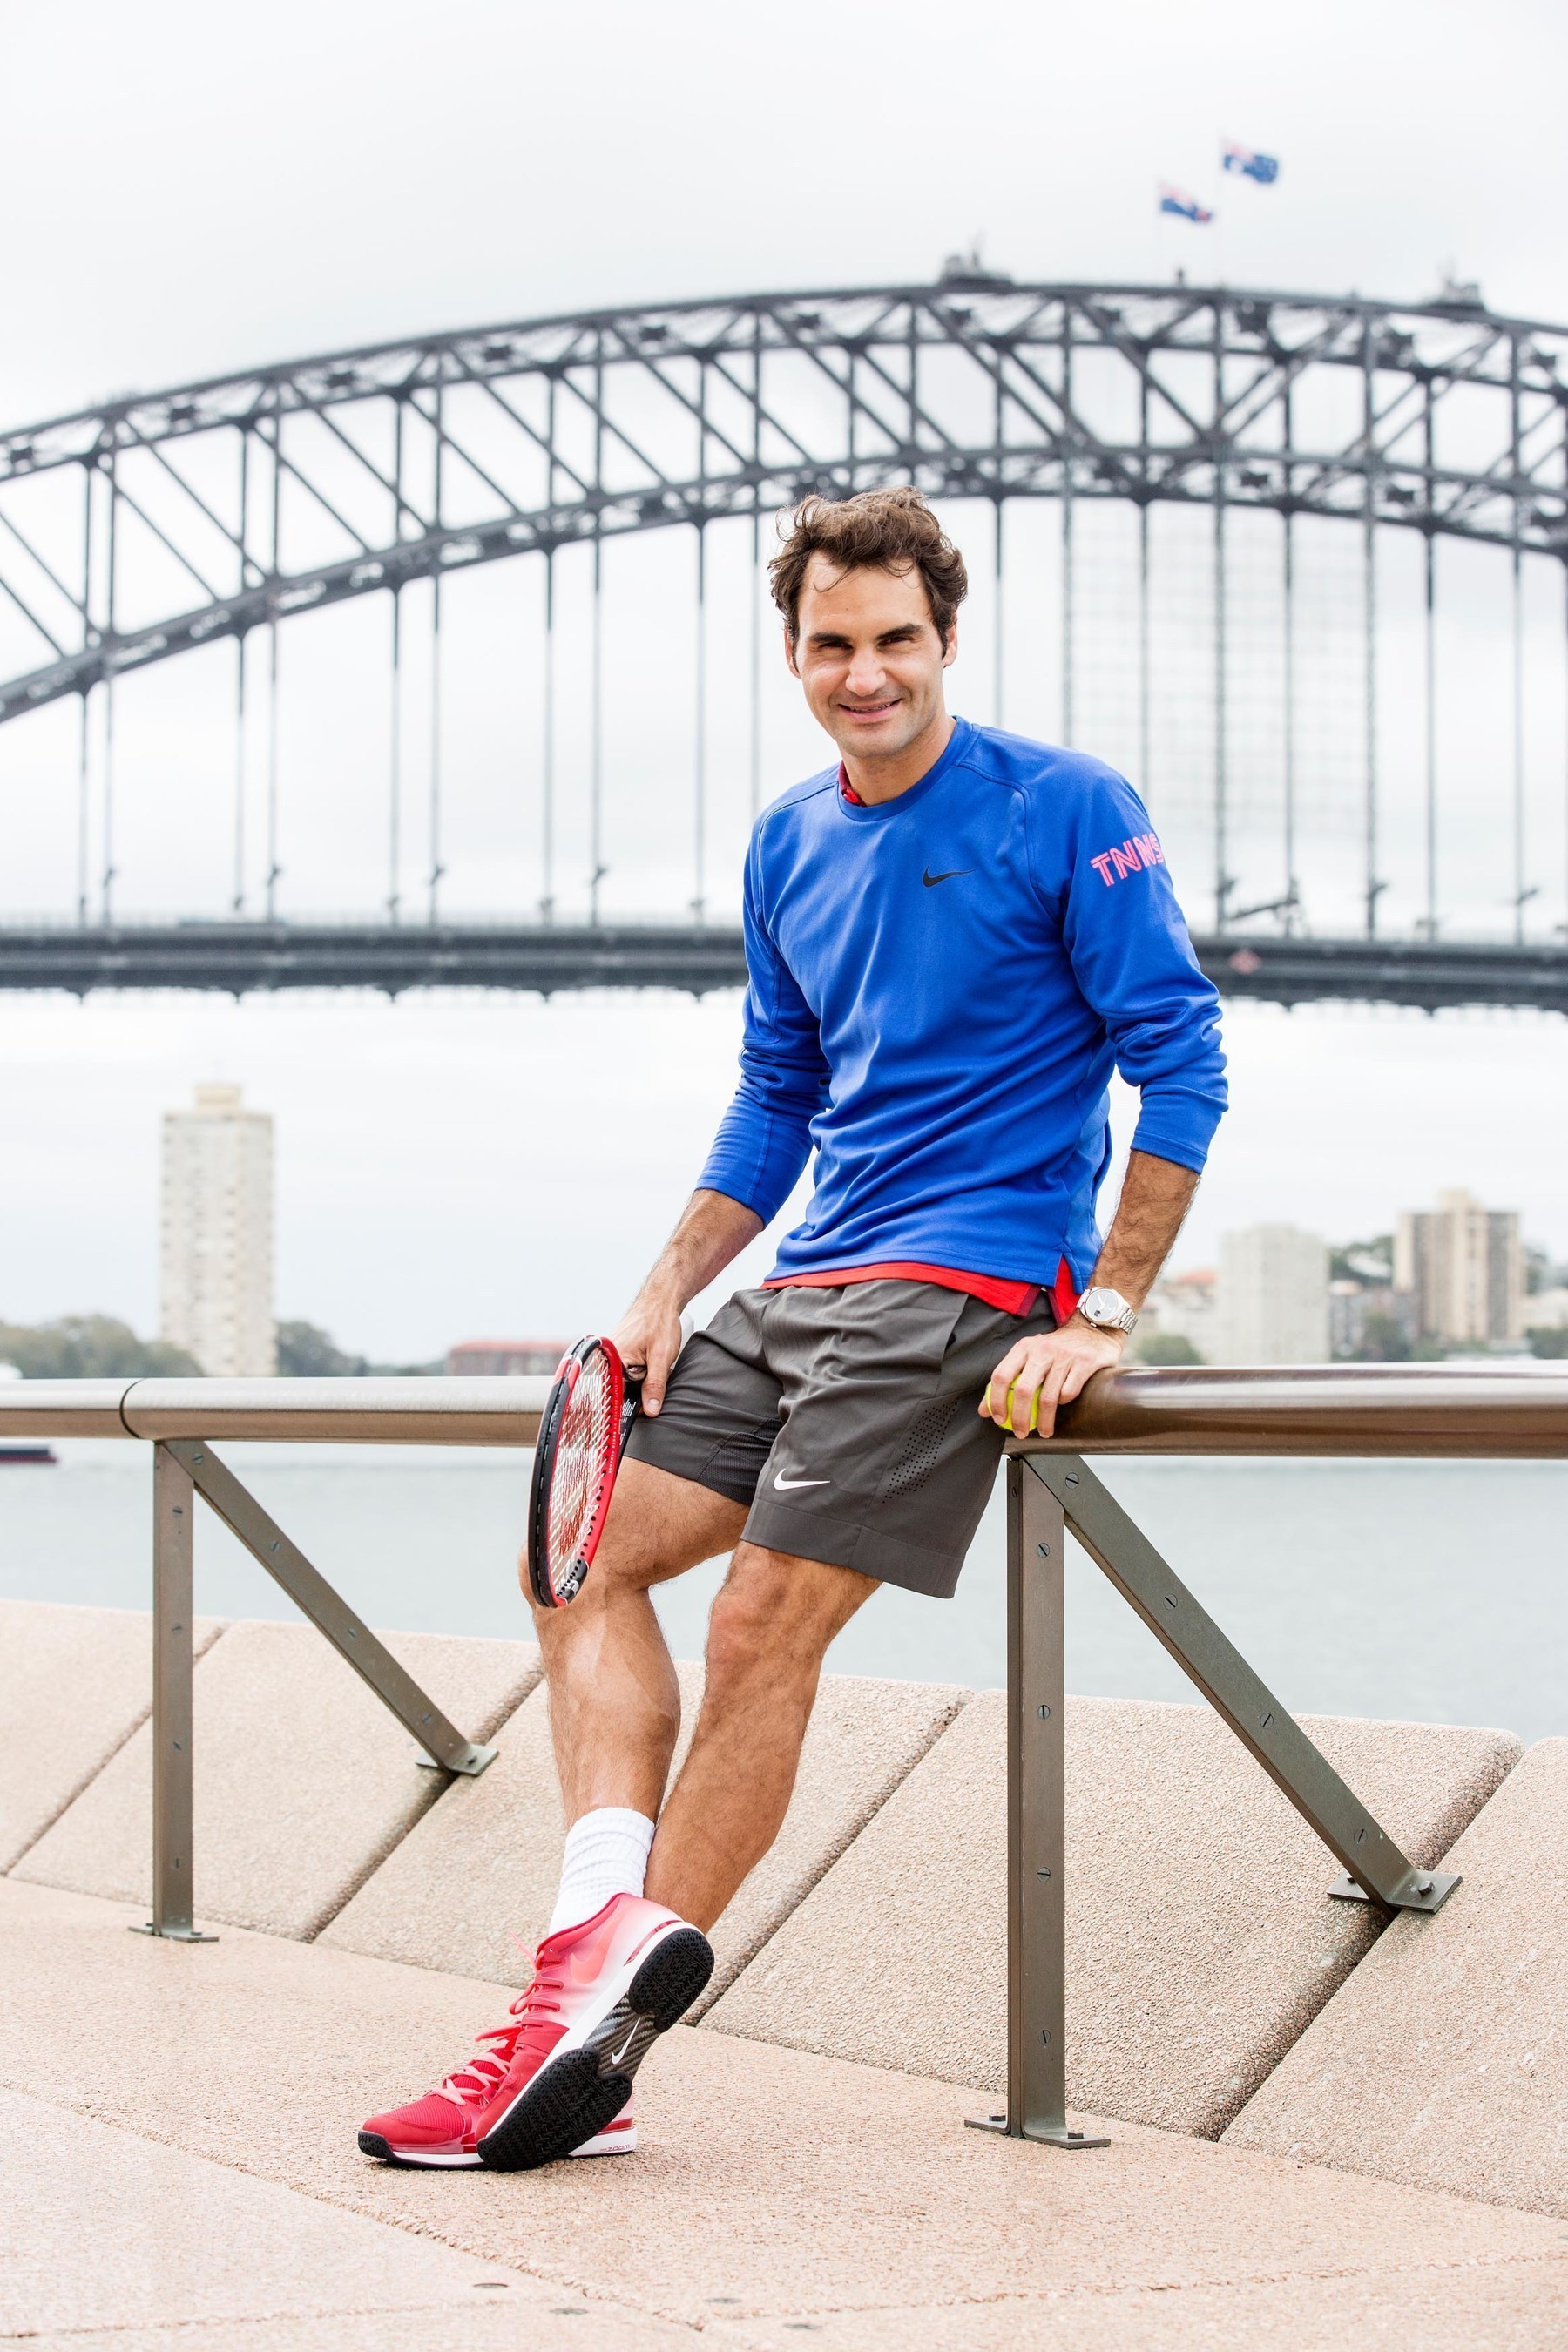 Roger Federer launches FAST4 TENNIS at the Sydney Opera House. Destination NSW_James Horan